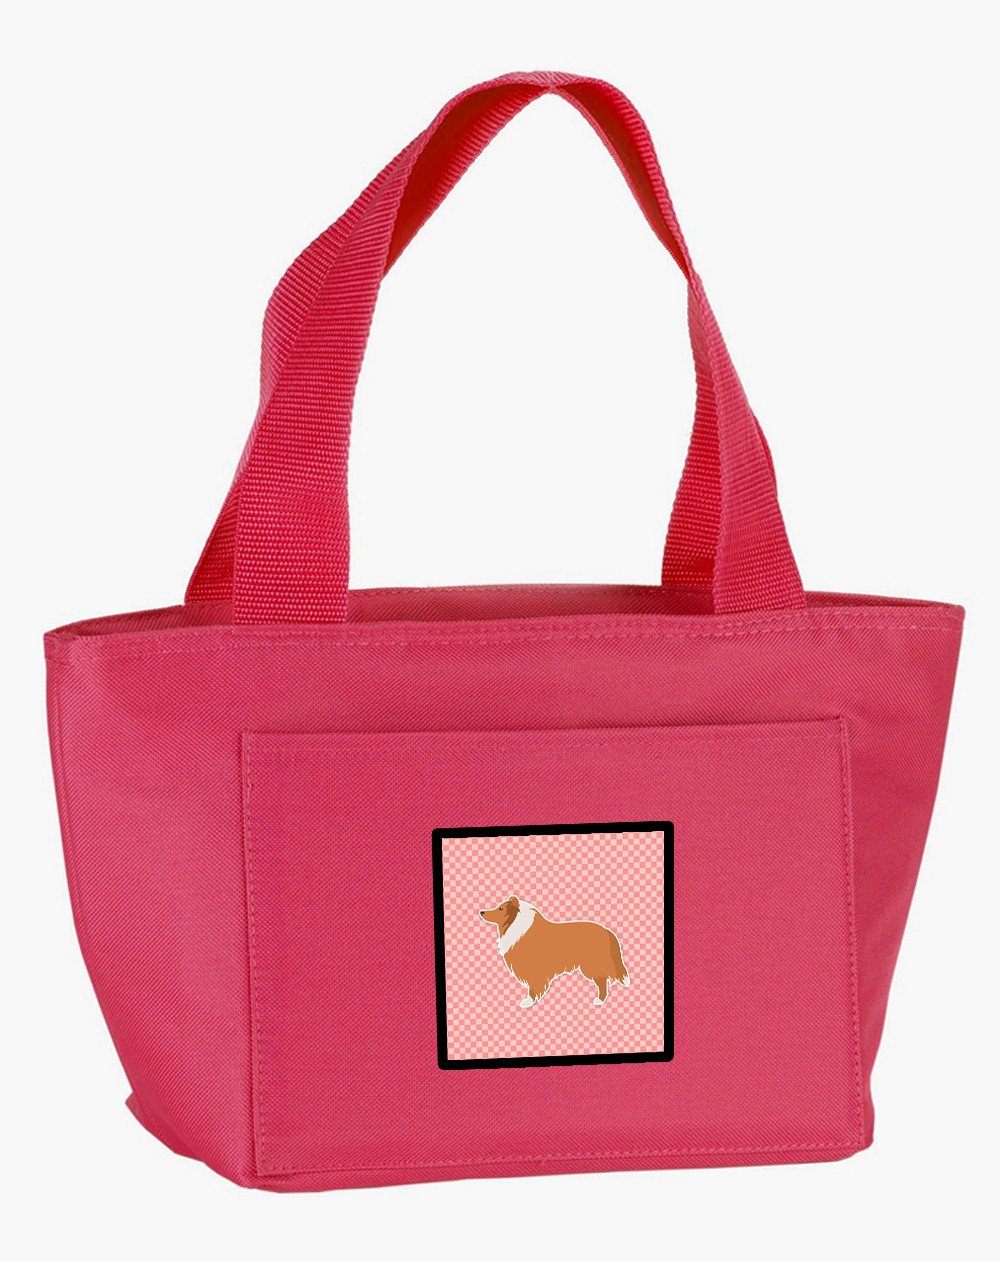 Collie Checkerboard Pink Lunch Bag BB3616PK-8808 by Caroline's Treasures